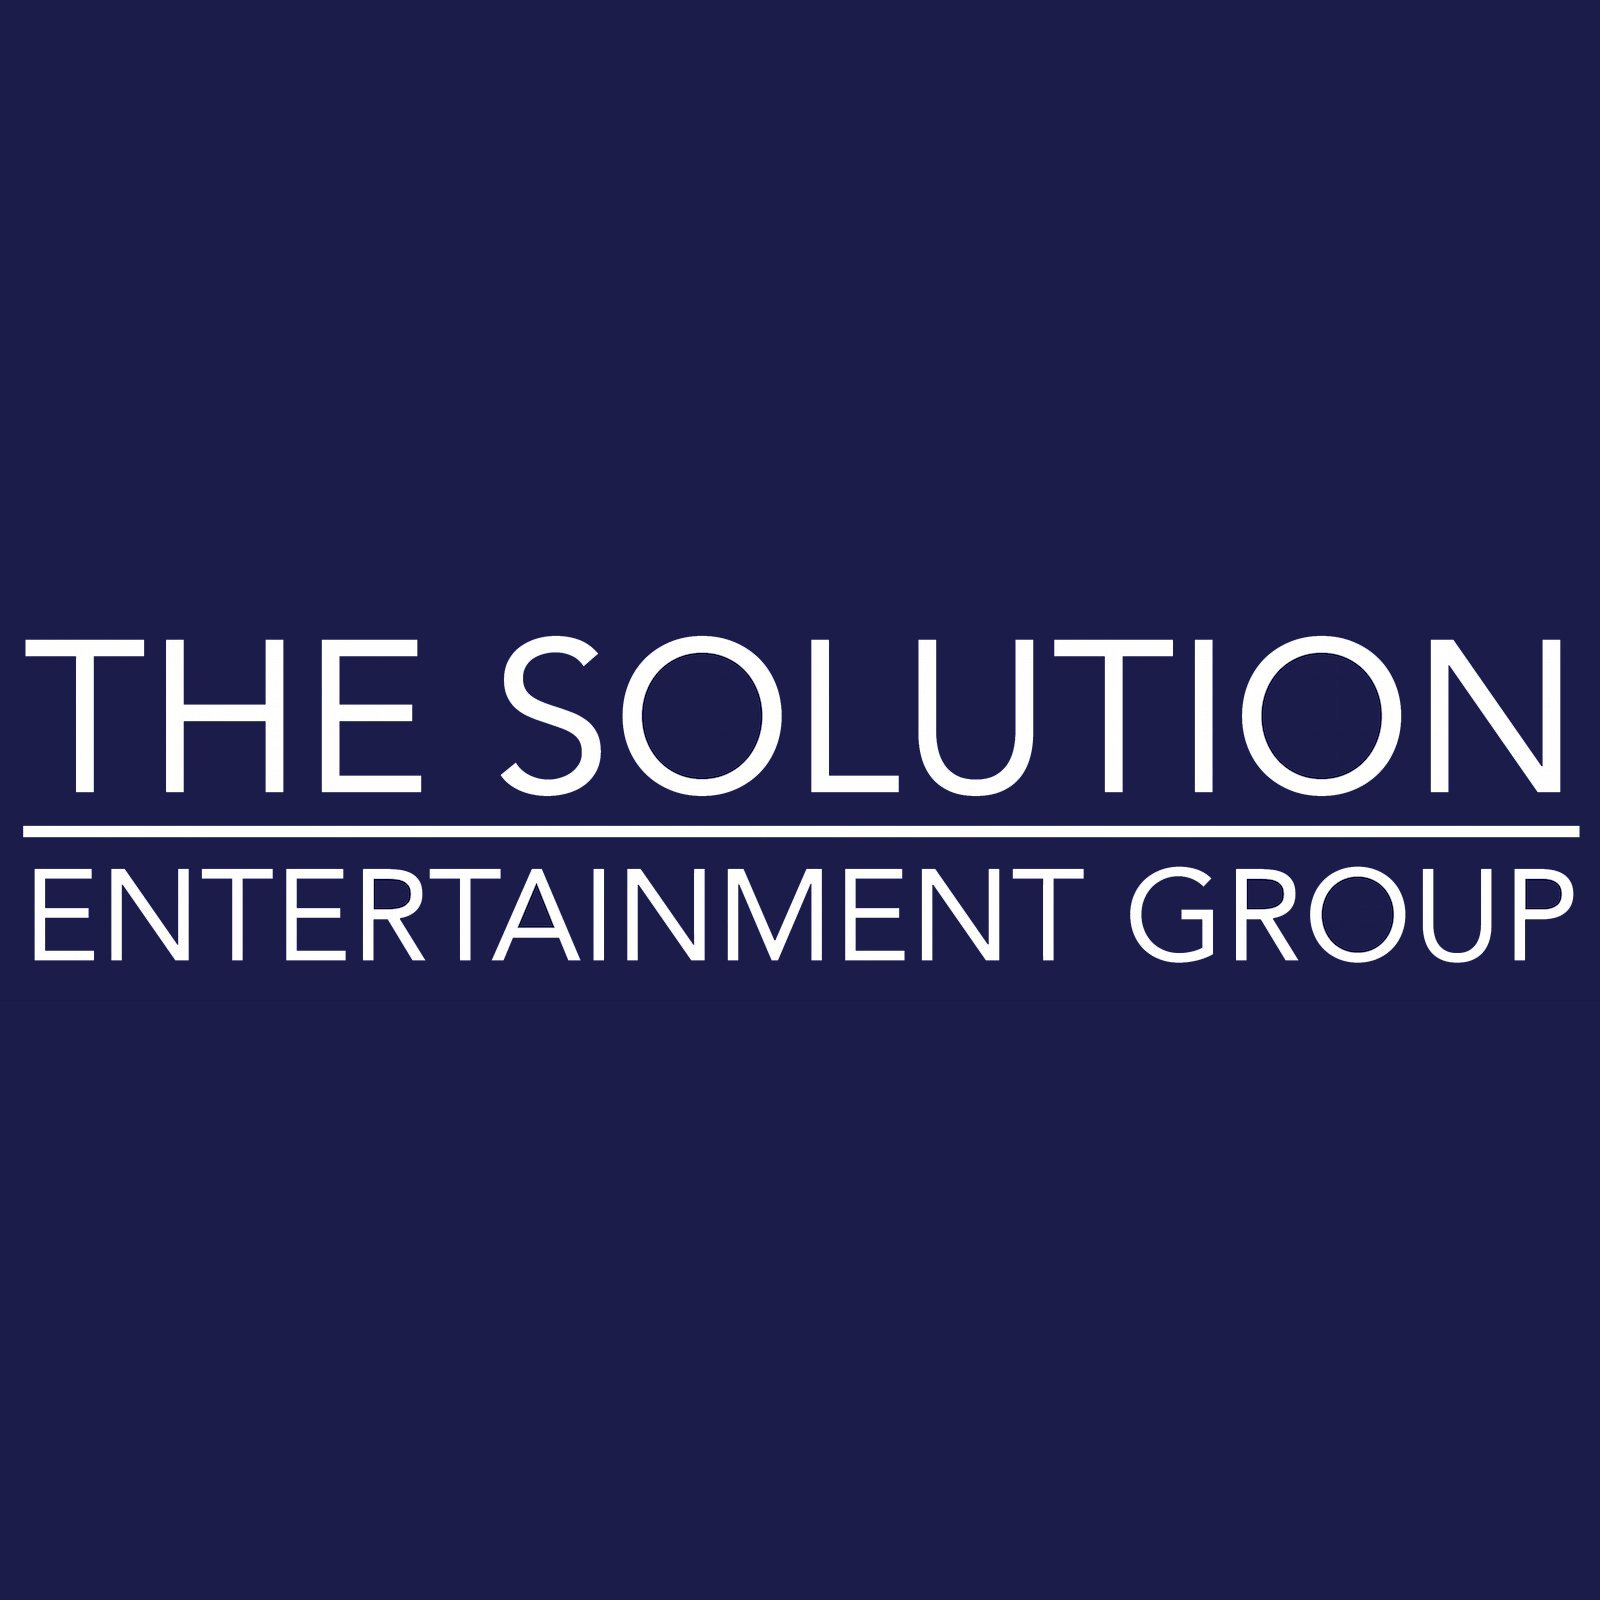 The Solution Entertainment Group is a multi-faceted, full service international film sales and financing company.